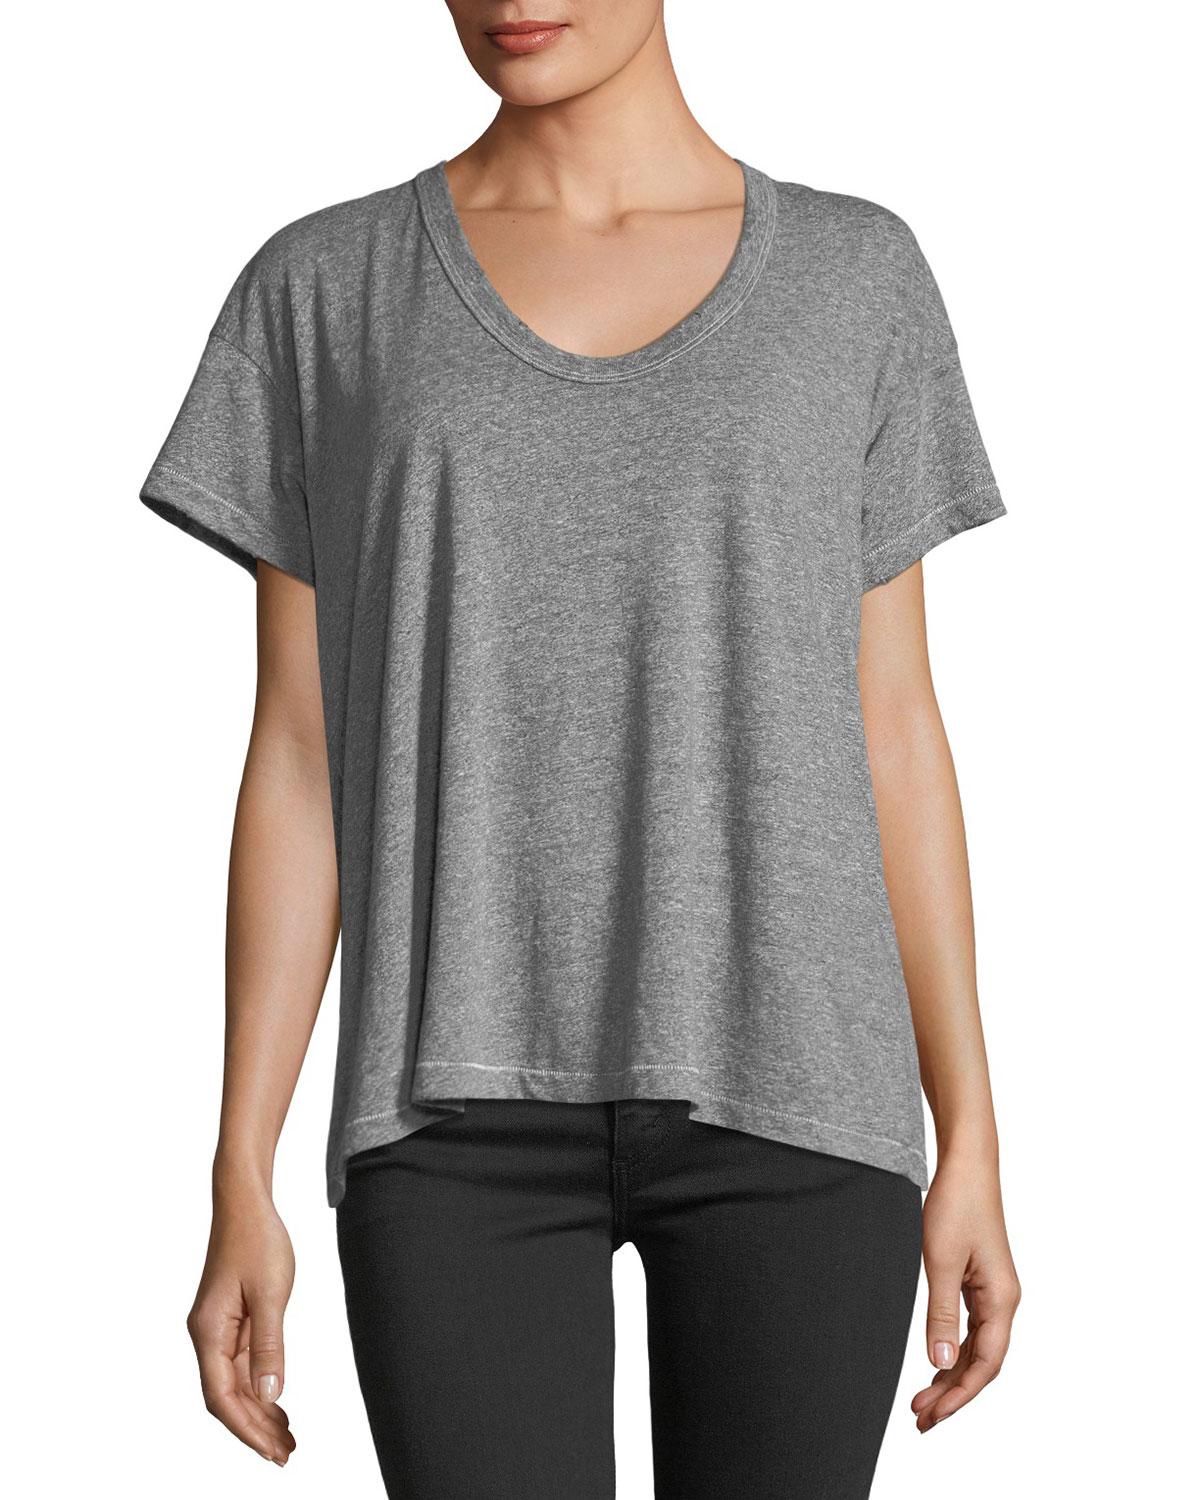 Lyst - The Great The U-neck Jersey Tee in Gray